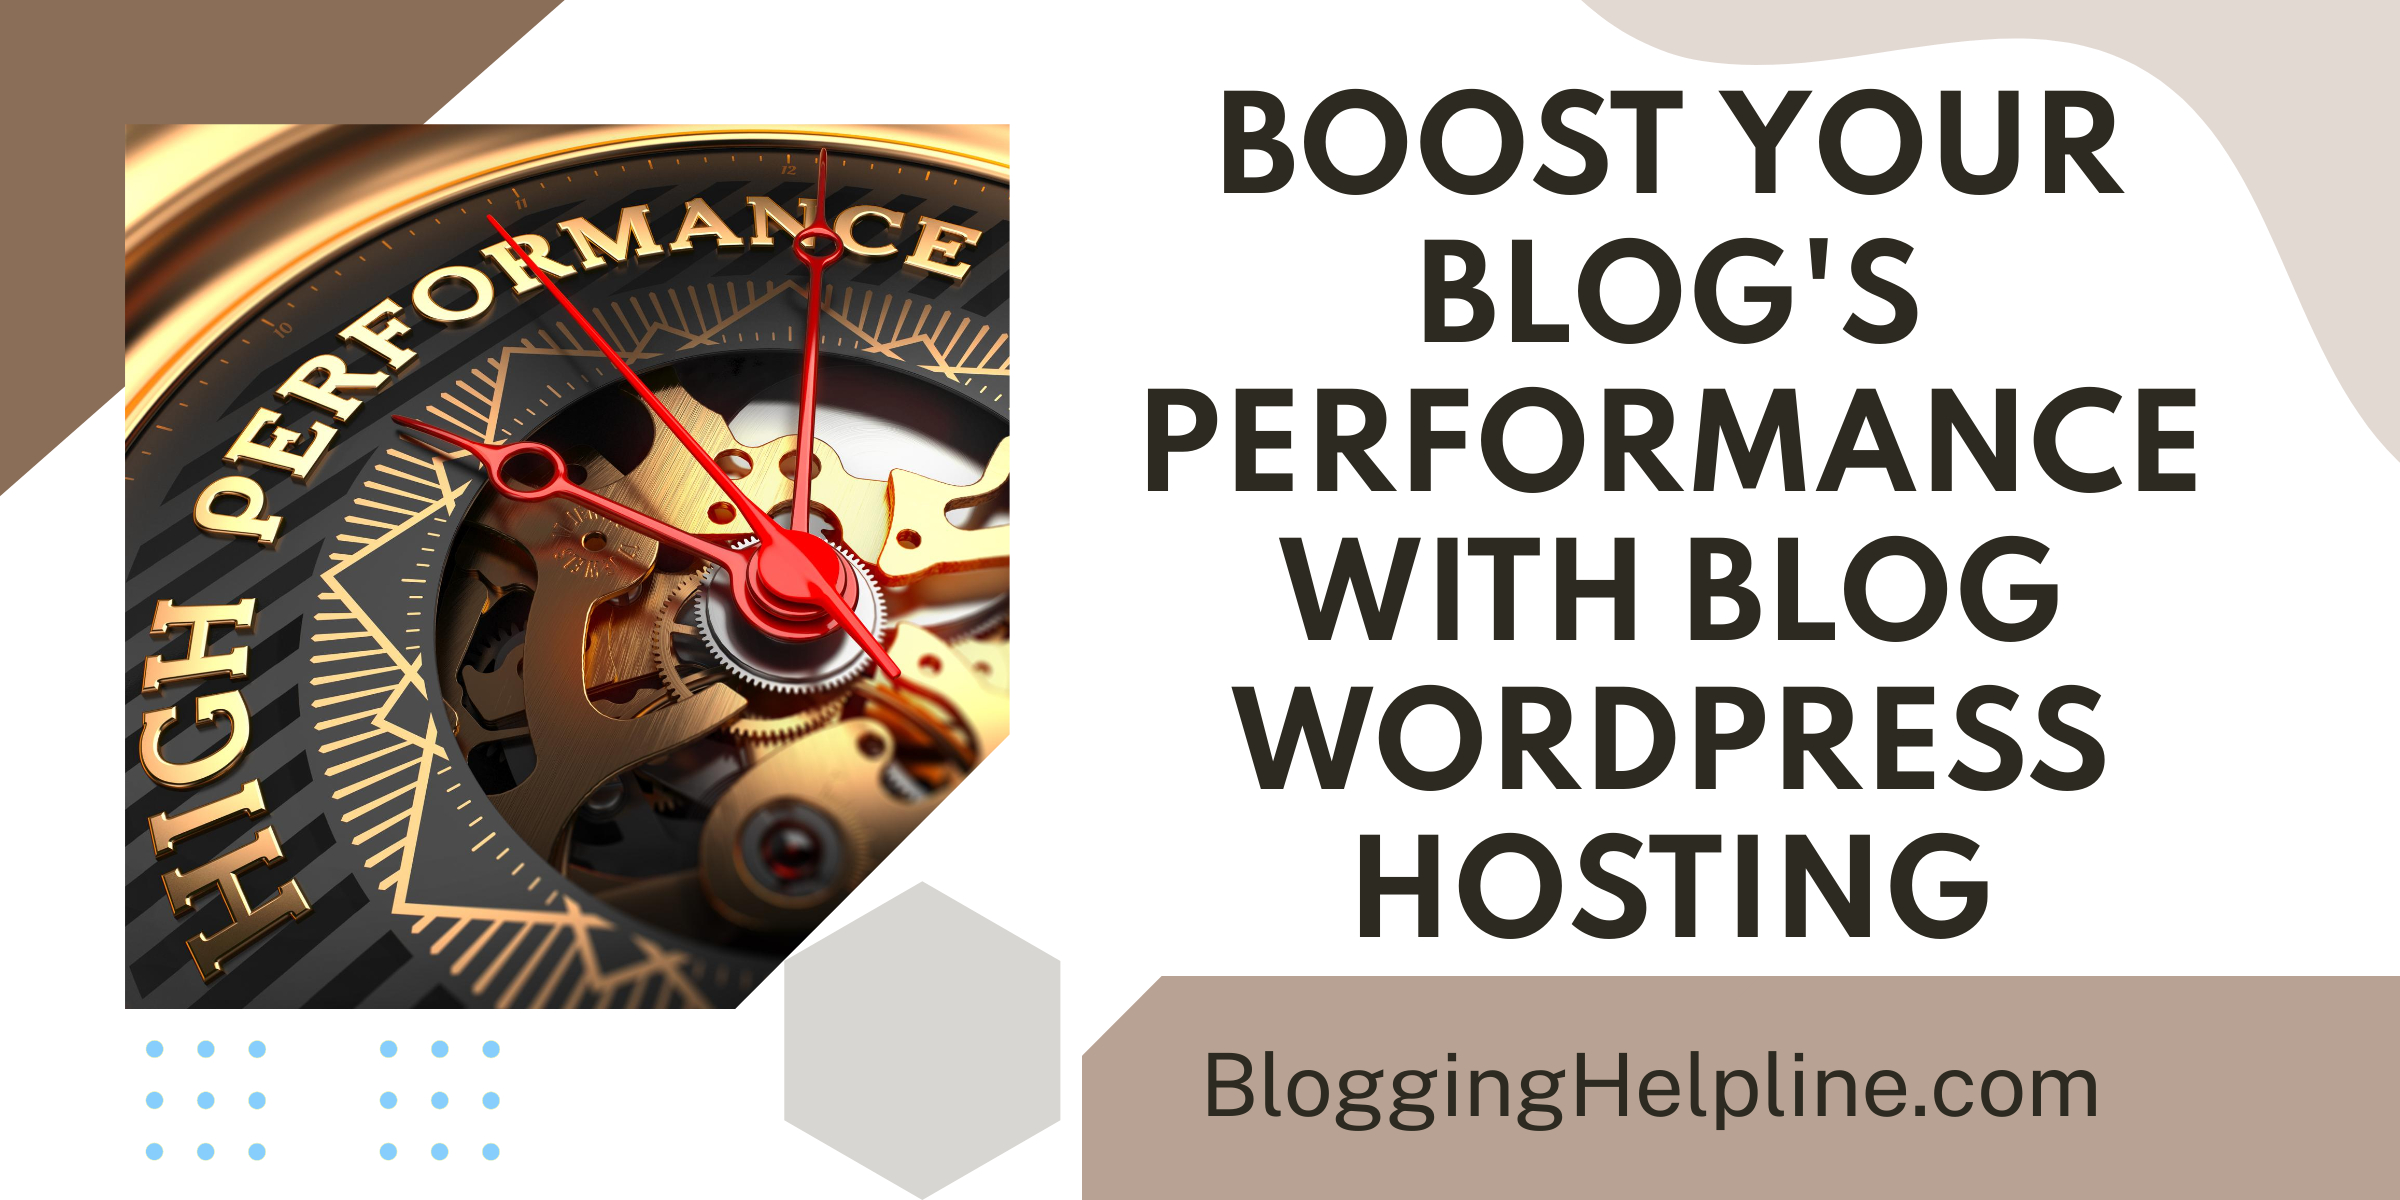 Boost Your Blog's Performance with Blog WordPress Hosting